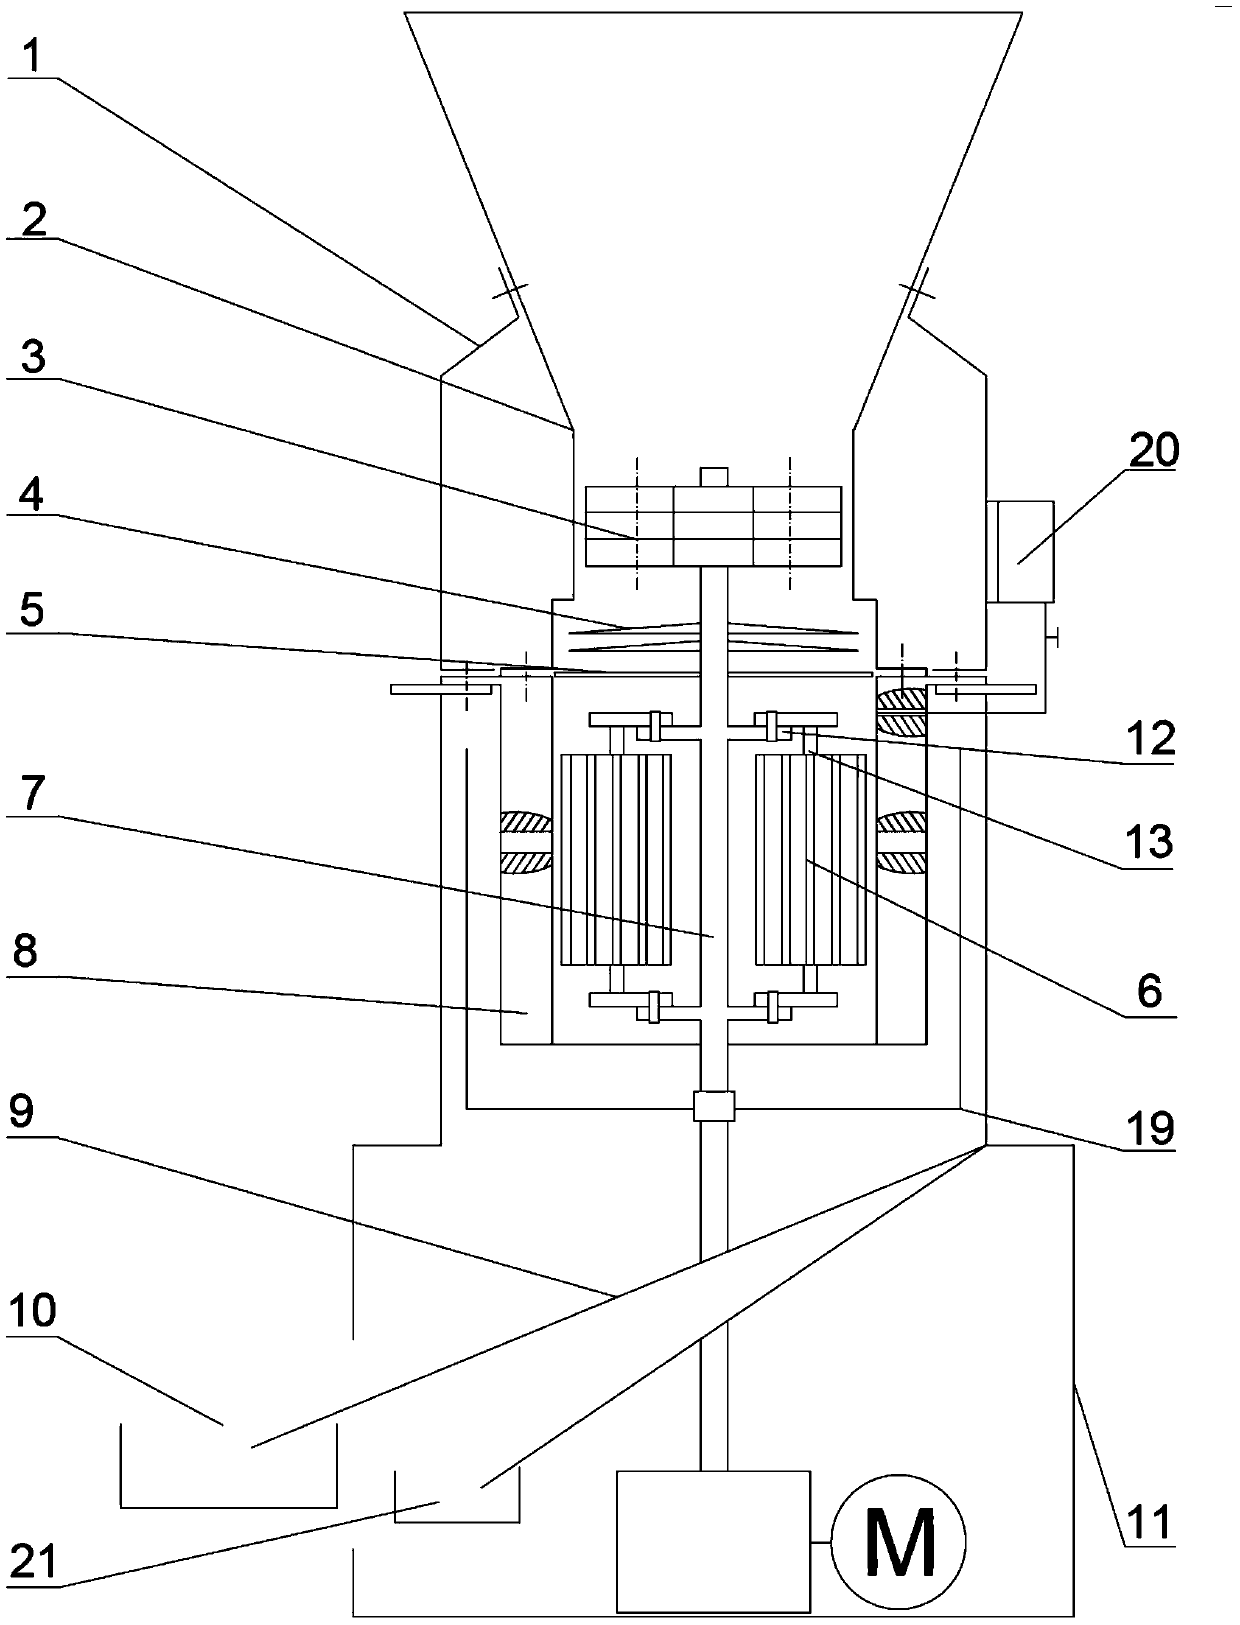 A vertical coaxial biomass crushing and forming integrated device